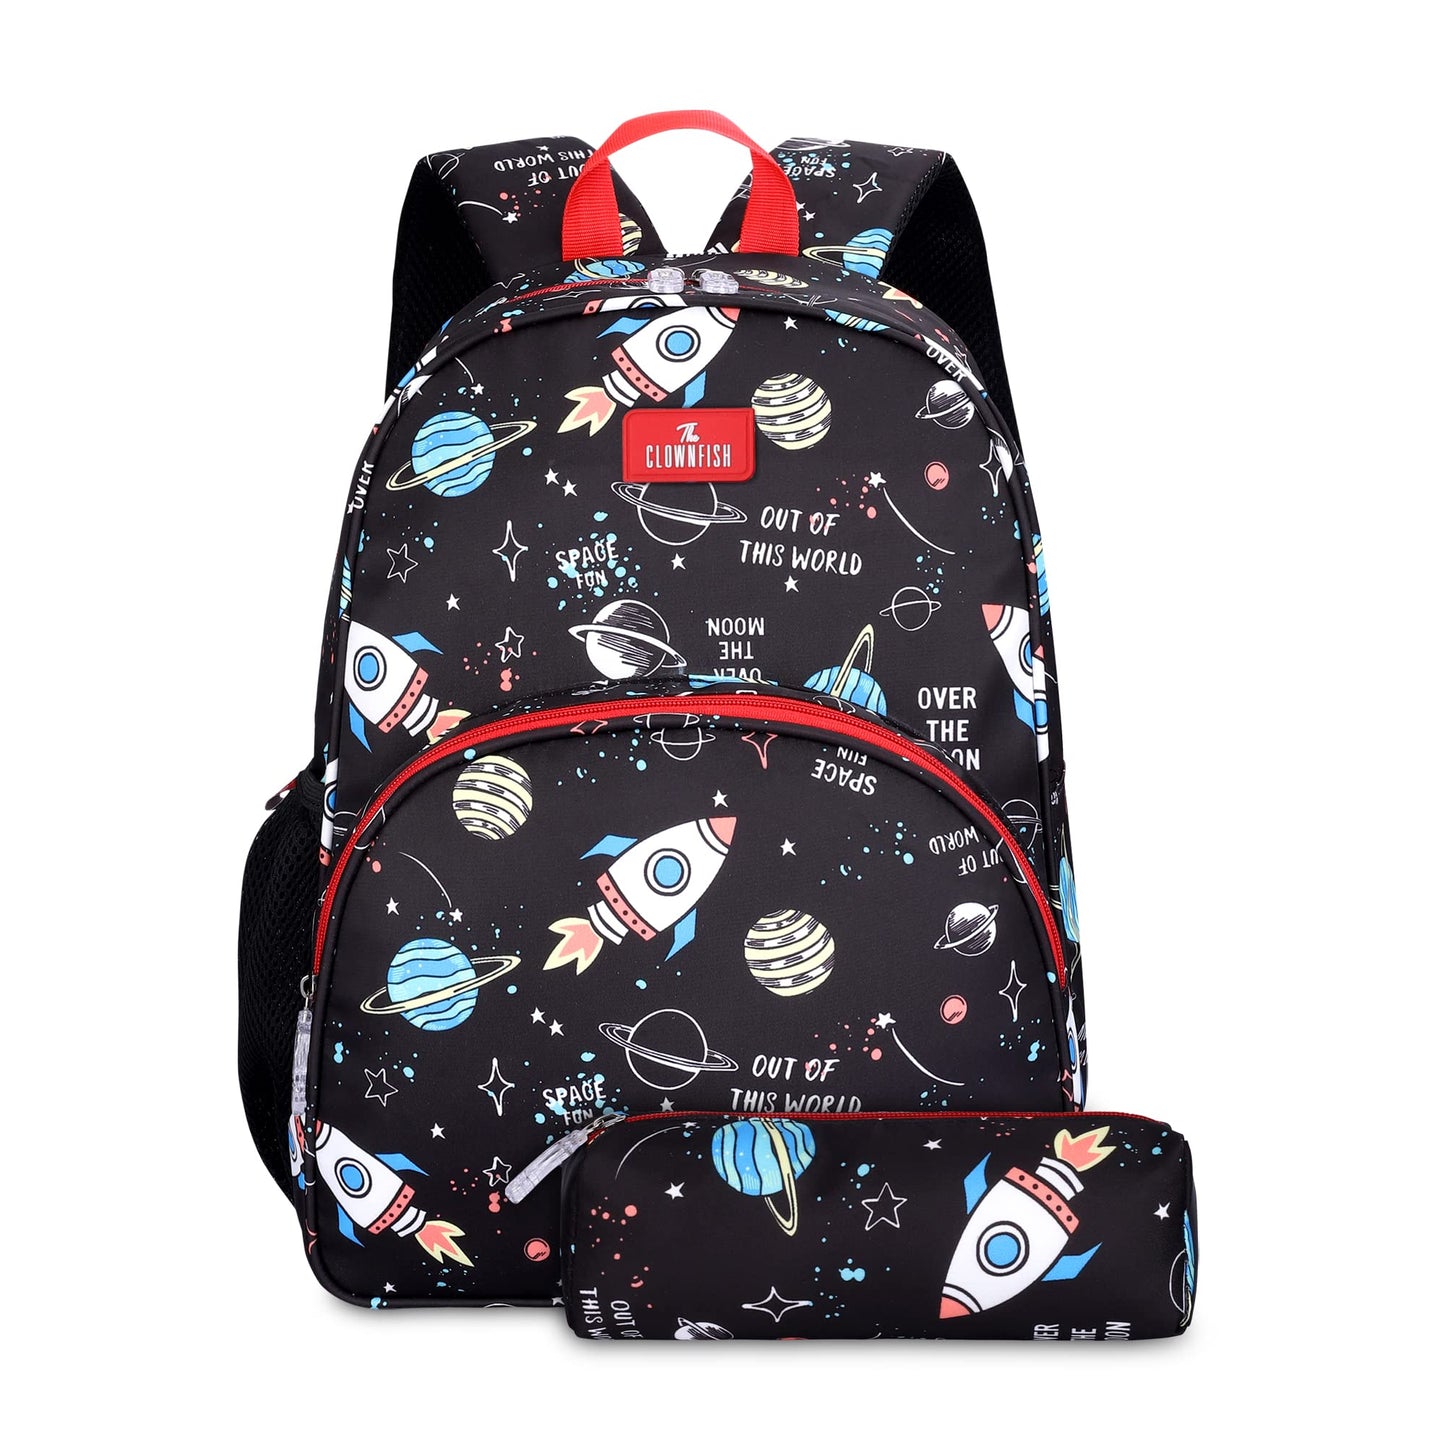 THE CLOWNFISH Kids 15L Backpack with Free Pencil Pouch, for Ages 5-7, Black, Medium Size